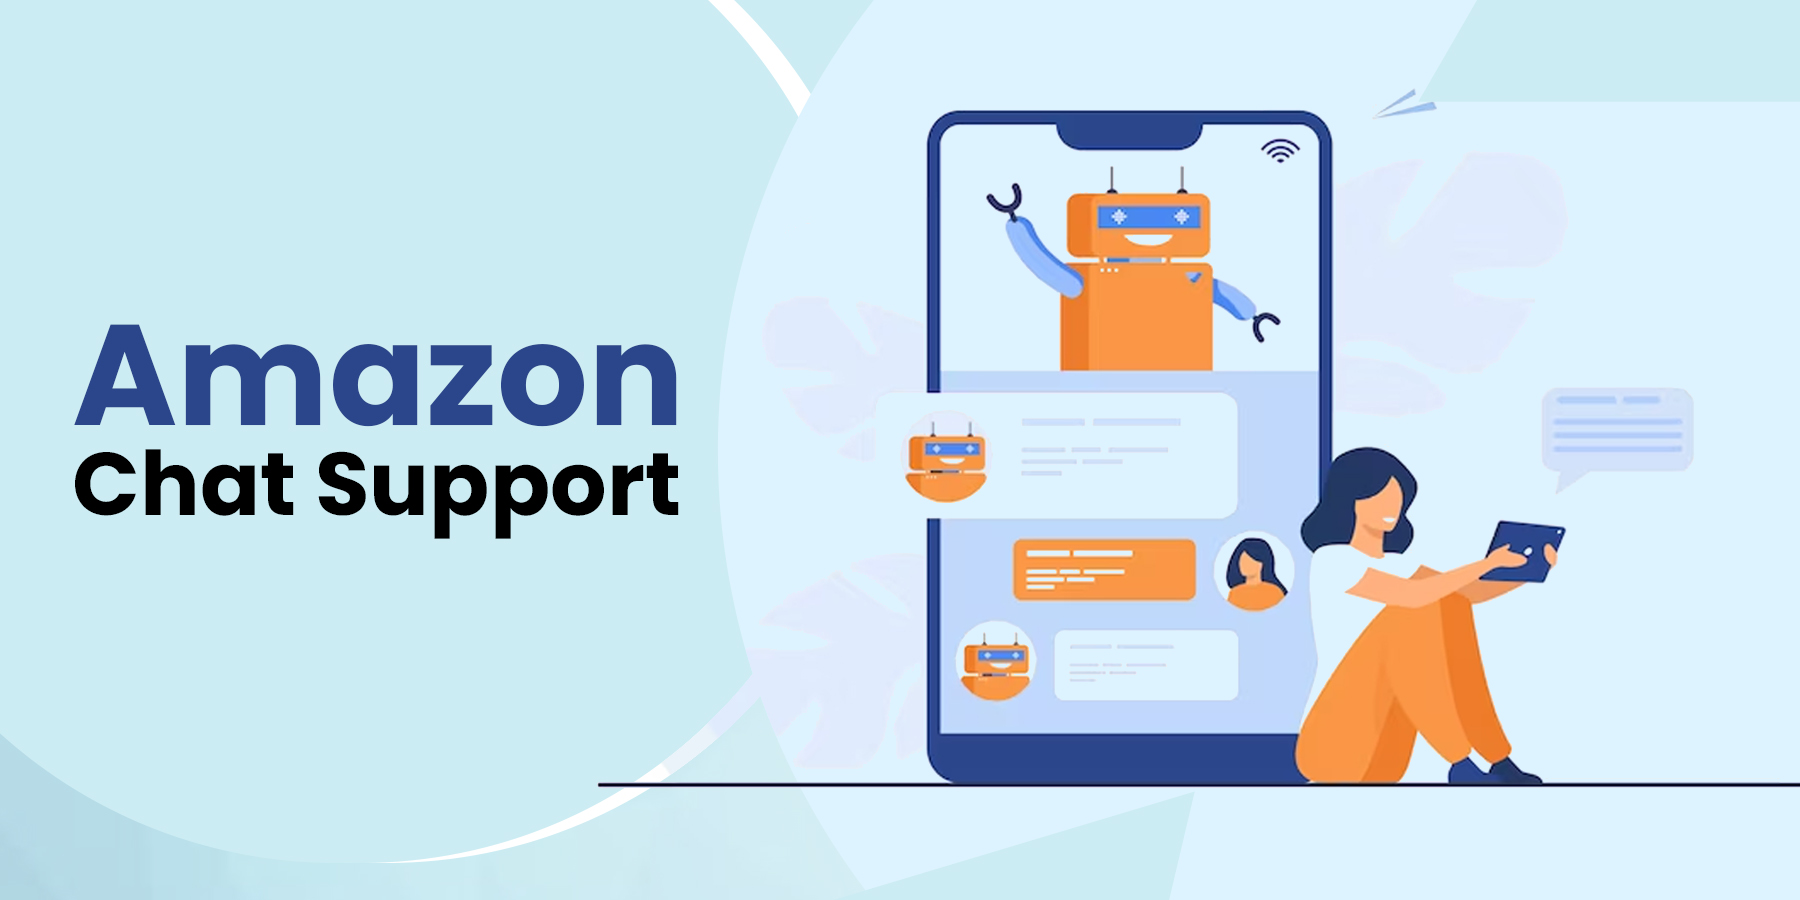 Amazon Chat Support